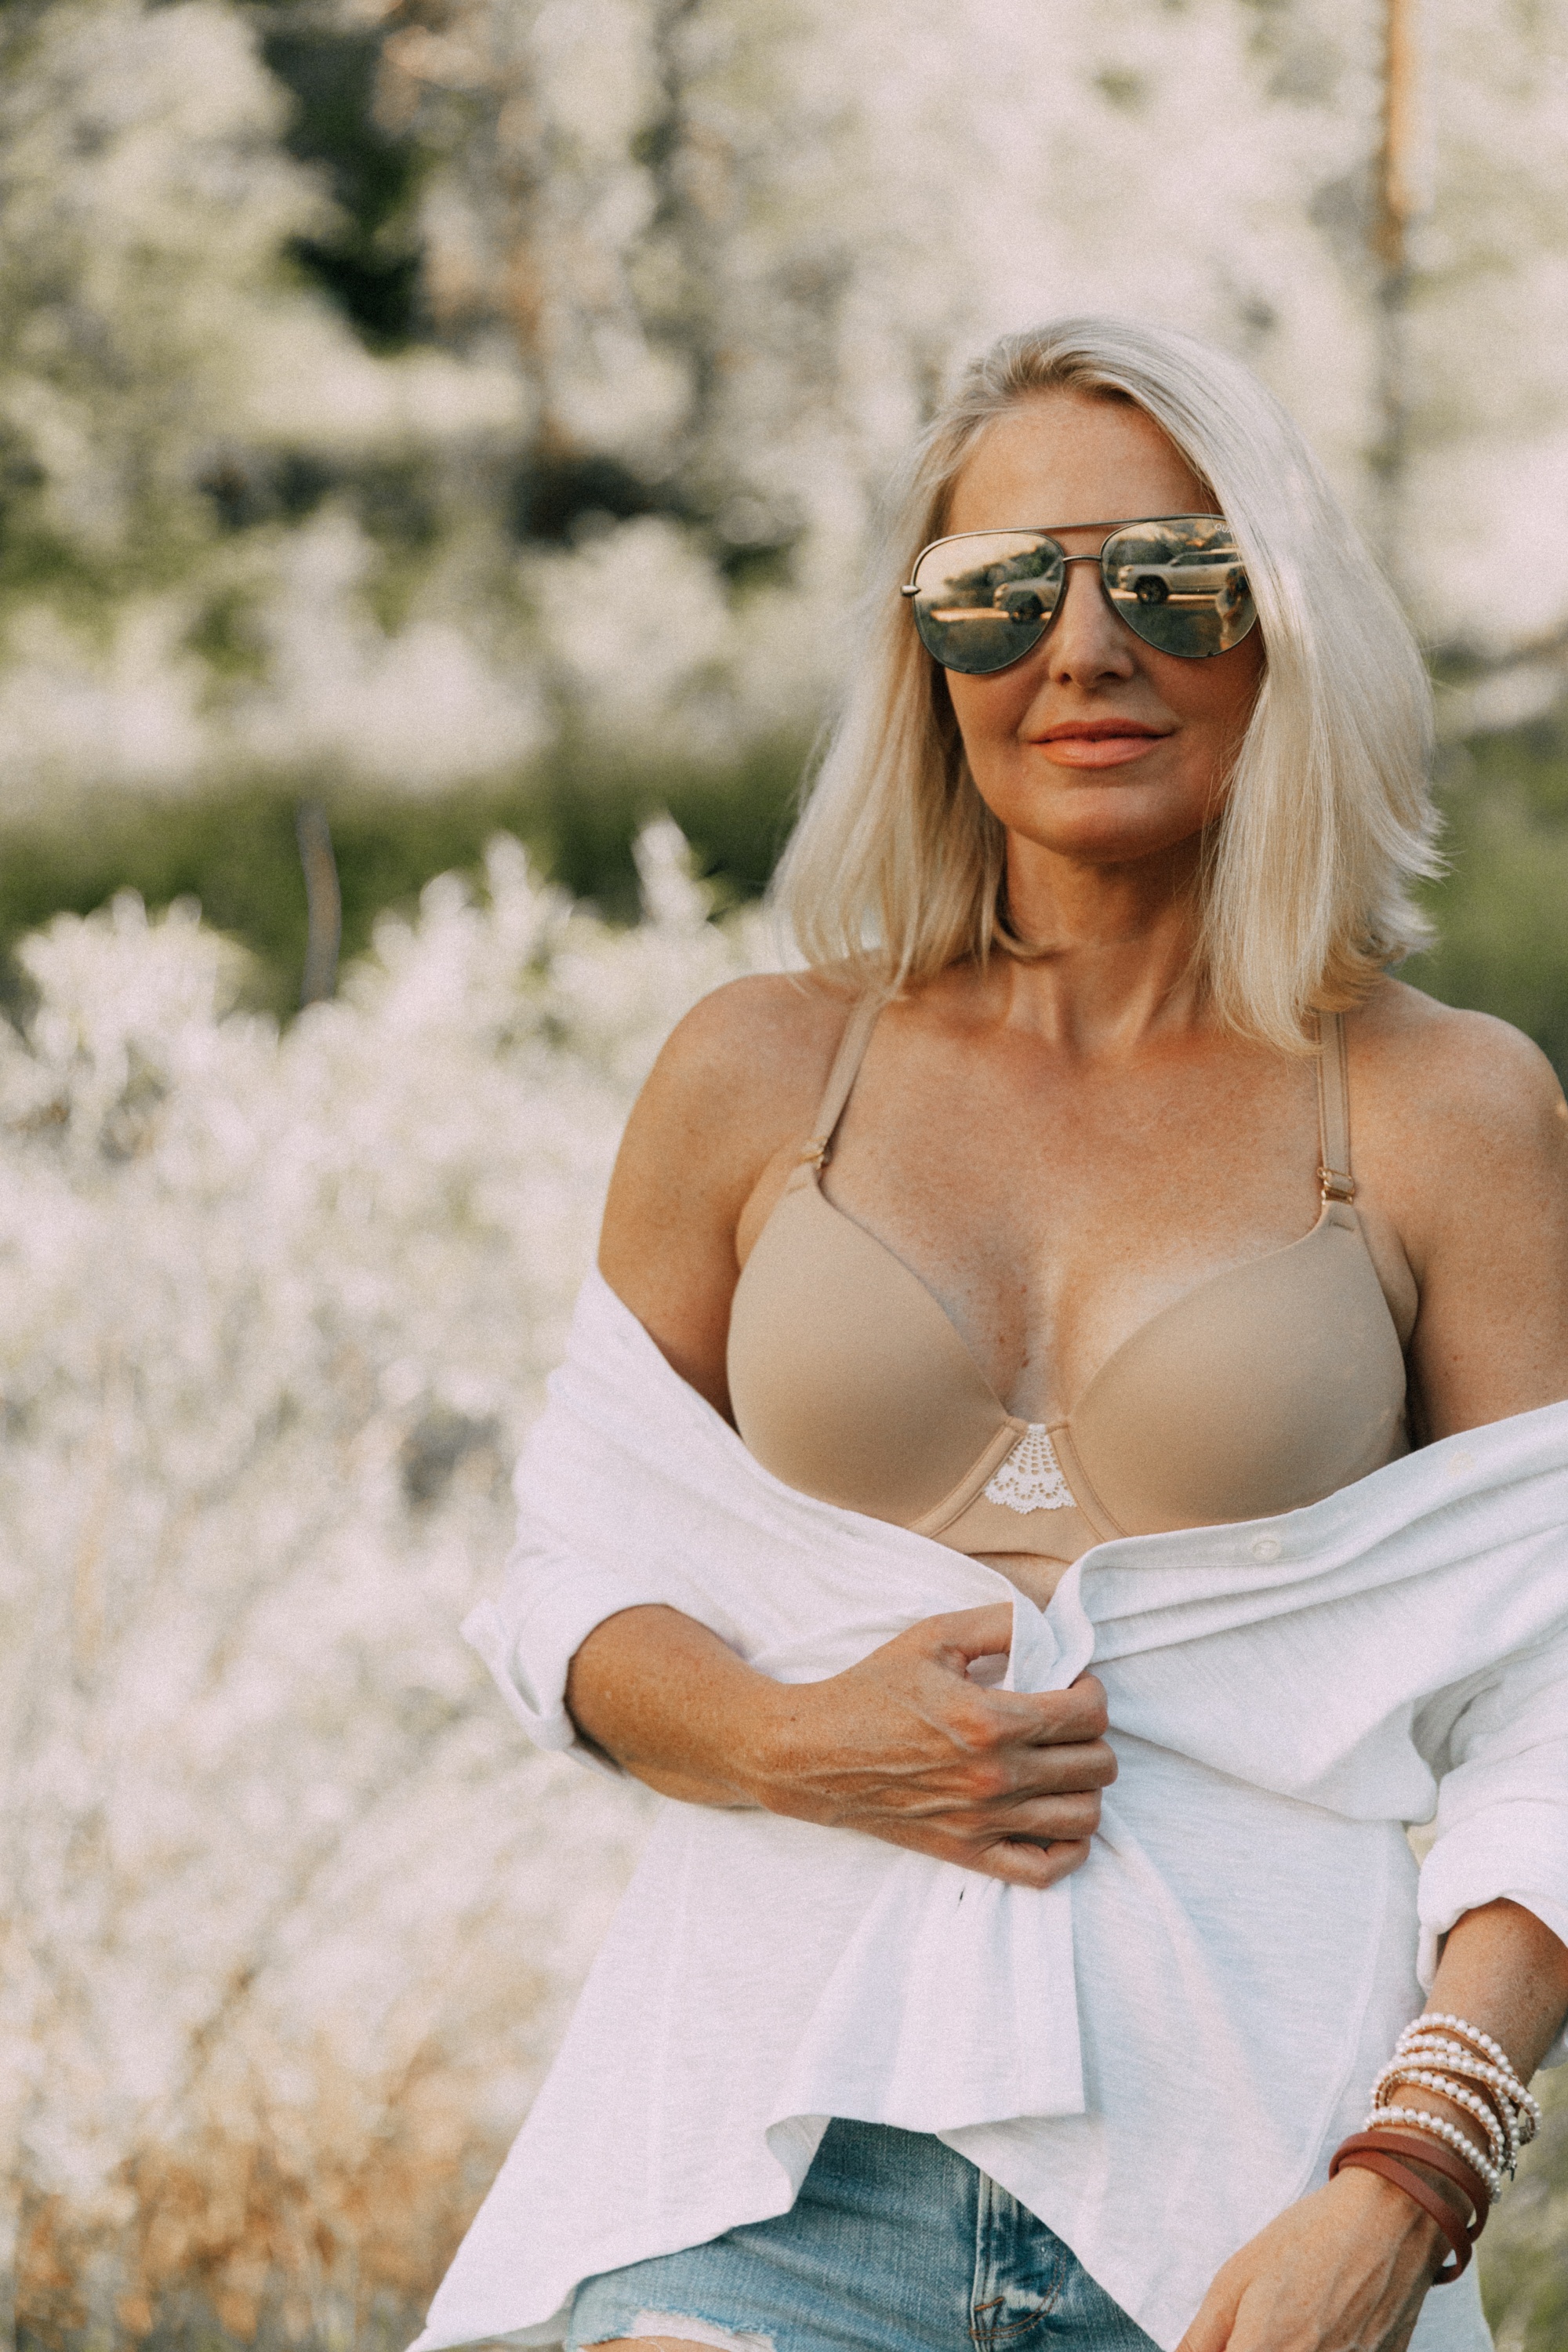 Racerback Bra, Fashion blogger Erin Busbee of BusbeeStyle.com wearing a racerback bra under a white button up tunic from Soma in Telluride, CO